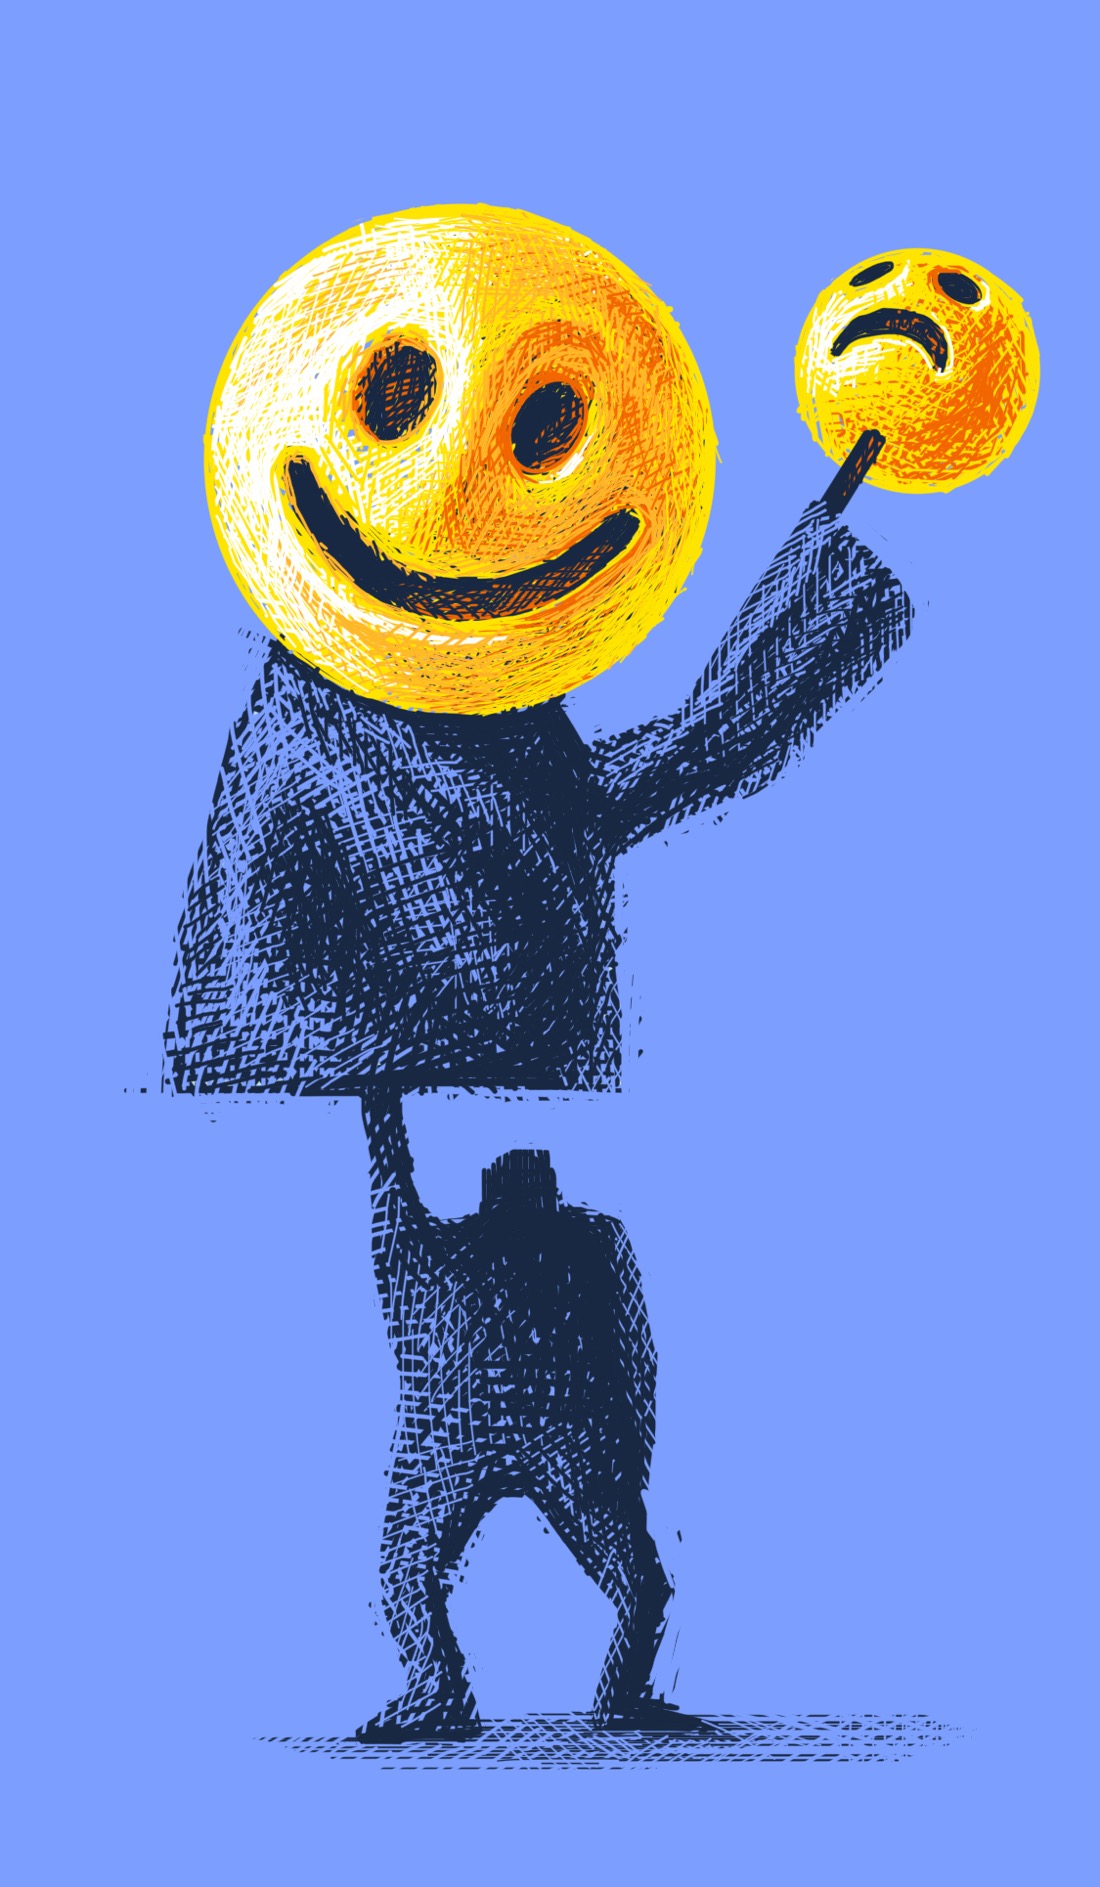 A figure holds up, over its head, a giant puppet that looks like a smiley-face emoji. The puppet is huge, about twice the size of the figure. The puppet has its own smaller puppet (or, perhaps, meta-puppet?) which looks like a frowny-face emoji.